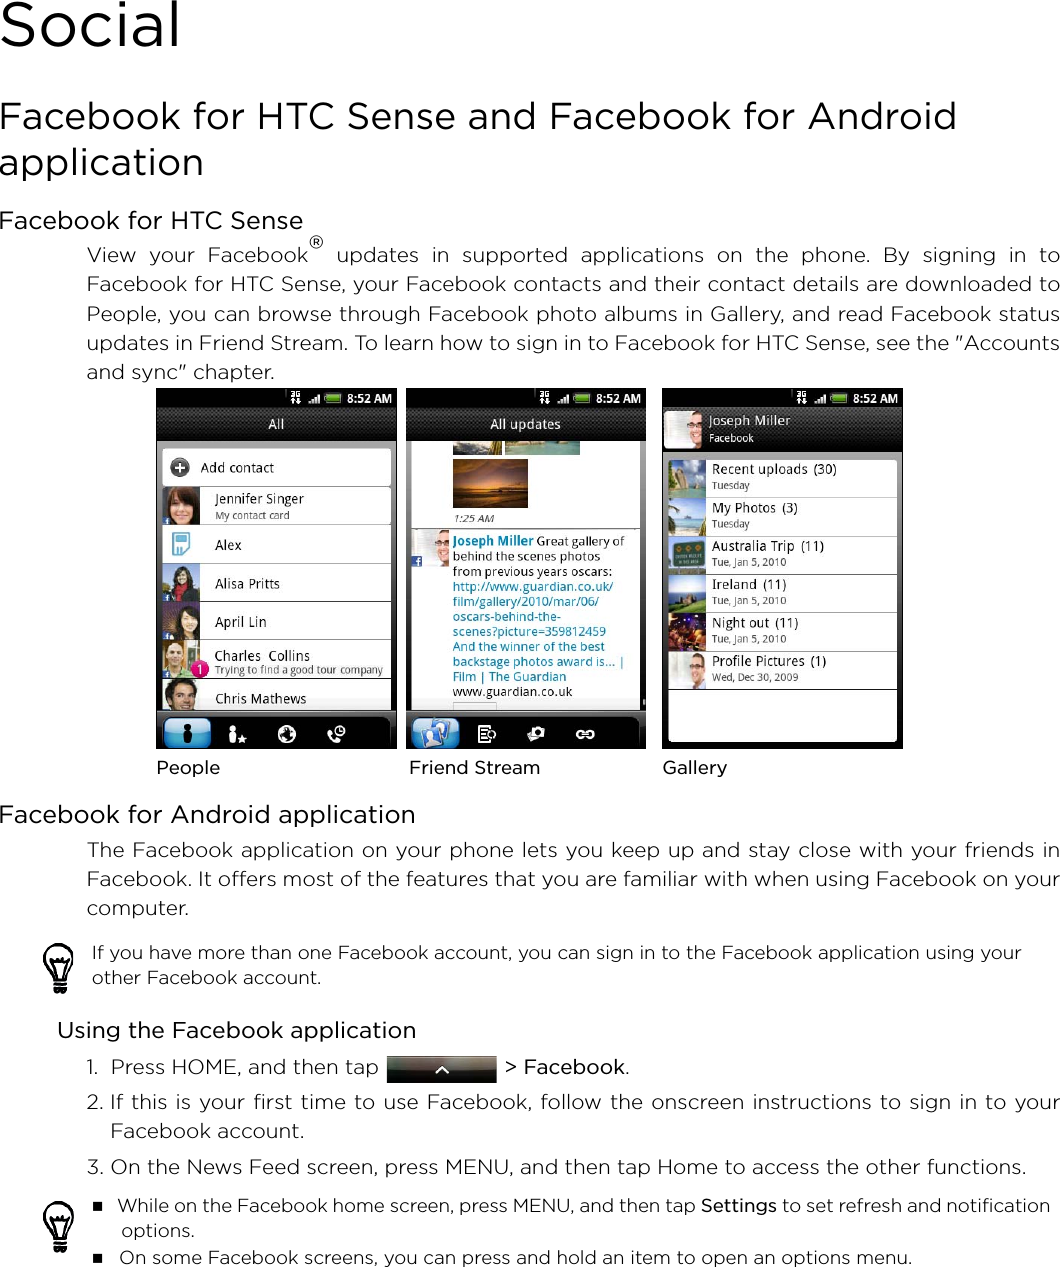 SocialFacebook for HTC Sense and Facebook for Android applicationFacebook for HTC SenseView your Facebook® updates in supported applications on the phone. By signing in toFacebook for HTC Sense, your Facebook contacts and their contact details are downloaded toPeople, you can browse through Facebook photo albums in Gallery, and read Facebook statusupdates in Friend Stream. To learn how to sign in to Facebook for HTC Sense, see the &quot;Accountsand sync&quot; chapter. Facebook for Android applicationThe Facebook application on your phone lets you keep up and stay close with your friends inFacebook. It offers most of the features that you are familiar with when using Facebook on yourcomputer.Using the Facebook application1.  Press HOME, and then tap  &gt; Facebook.2. If this is your first time to use Facebook, follow the onscreen instructions to sign in to yourFacebook account.3. On the News Feed screen, press MENU, and then tap Home to access the other functions.If you have more than one Facebook account, you can sign in to the Facebook application using your other Facebook account.  While on the Facebook home screen, press MENU, and then tap Settings to set refresh and notification options. On some Facebook screens, you can press and hold an item to open an options menu. People Friend Stream Gallery